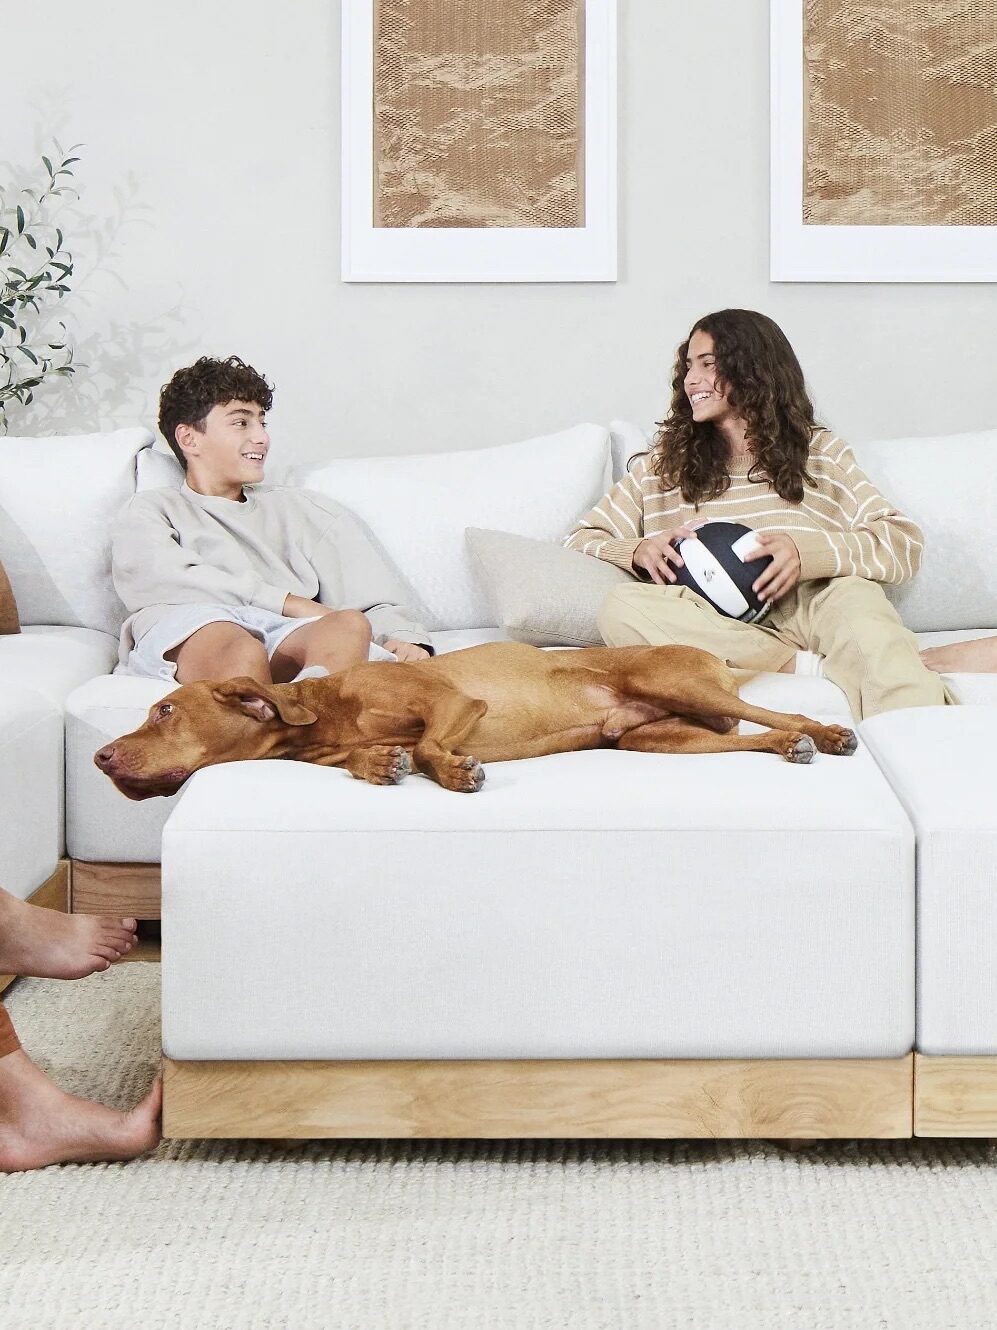 Four people are seated on a large white sectional sofa with wooden frames, engaging in conversation and reading. A brown dog is lying on one of the cushions. Shelves and decor are in the background.